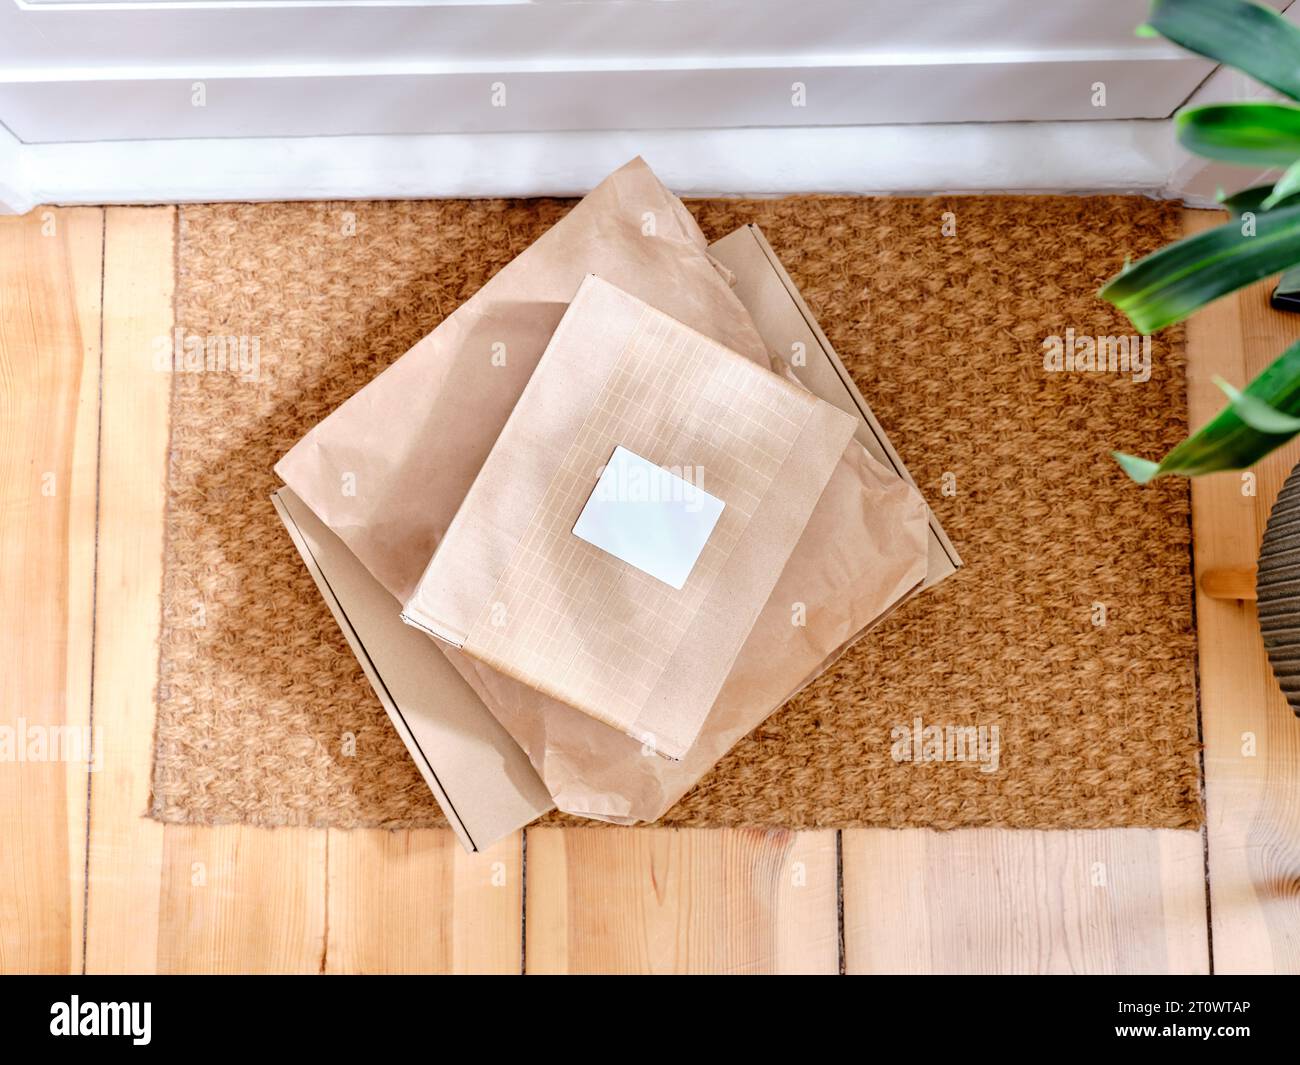 Stack of delivered cardboard parcels on a door mat next to apartment entrance Stock Photo